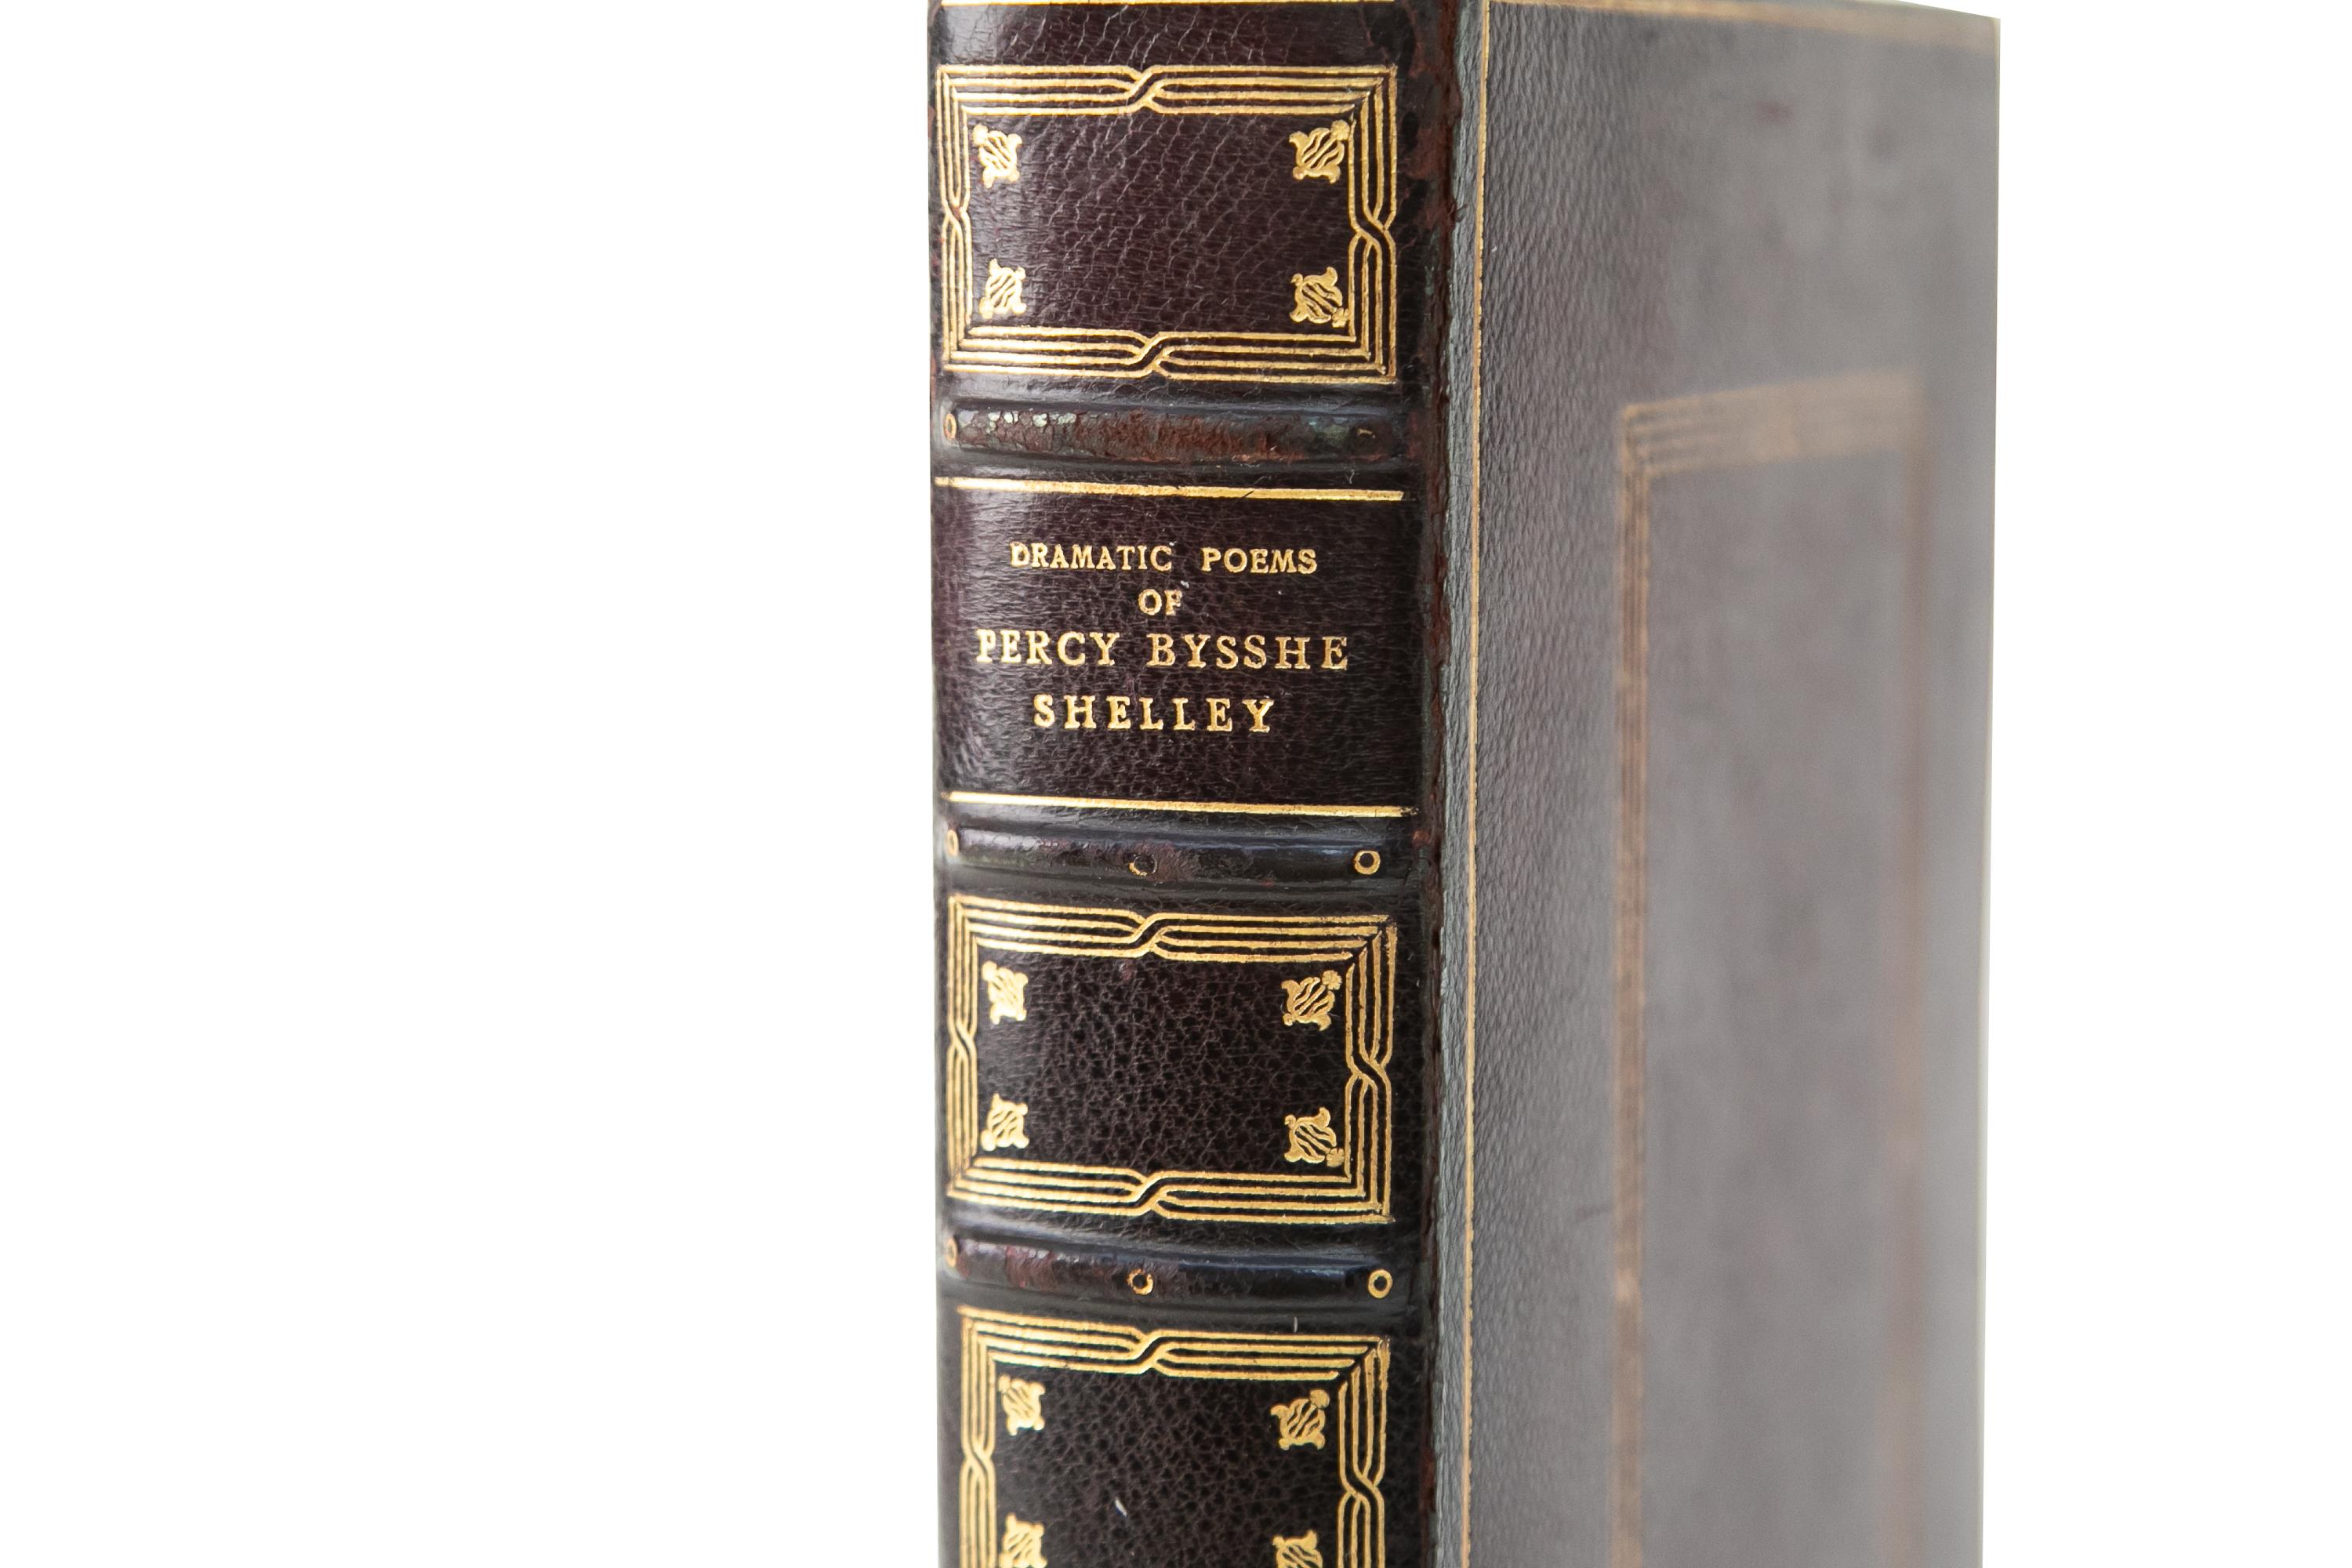 20th Century 1 Volume. Percy Bysshe Shelley, Dramatic Poems. For Sale